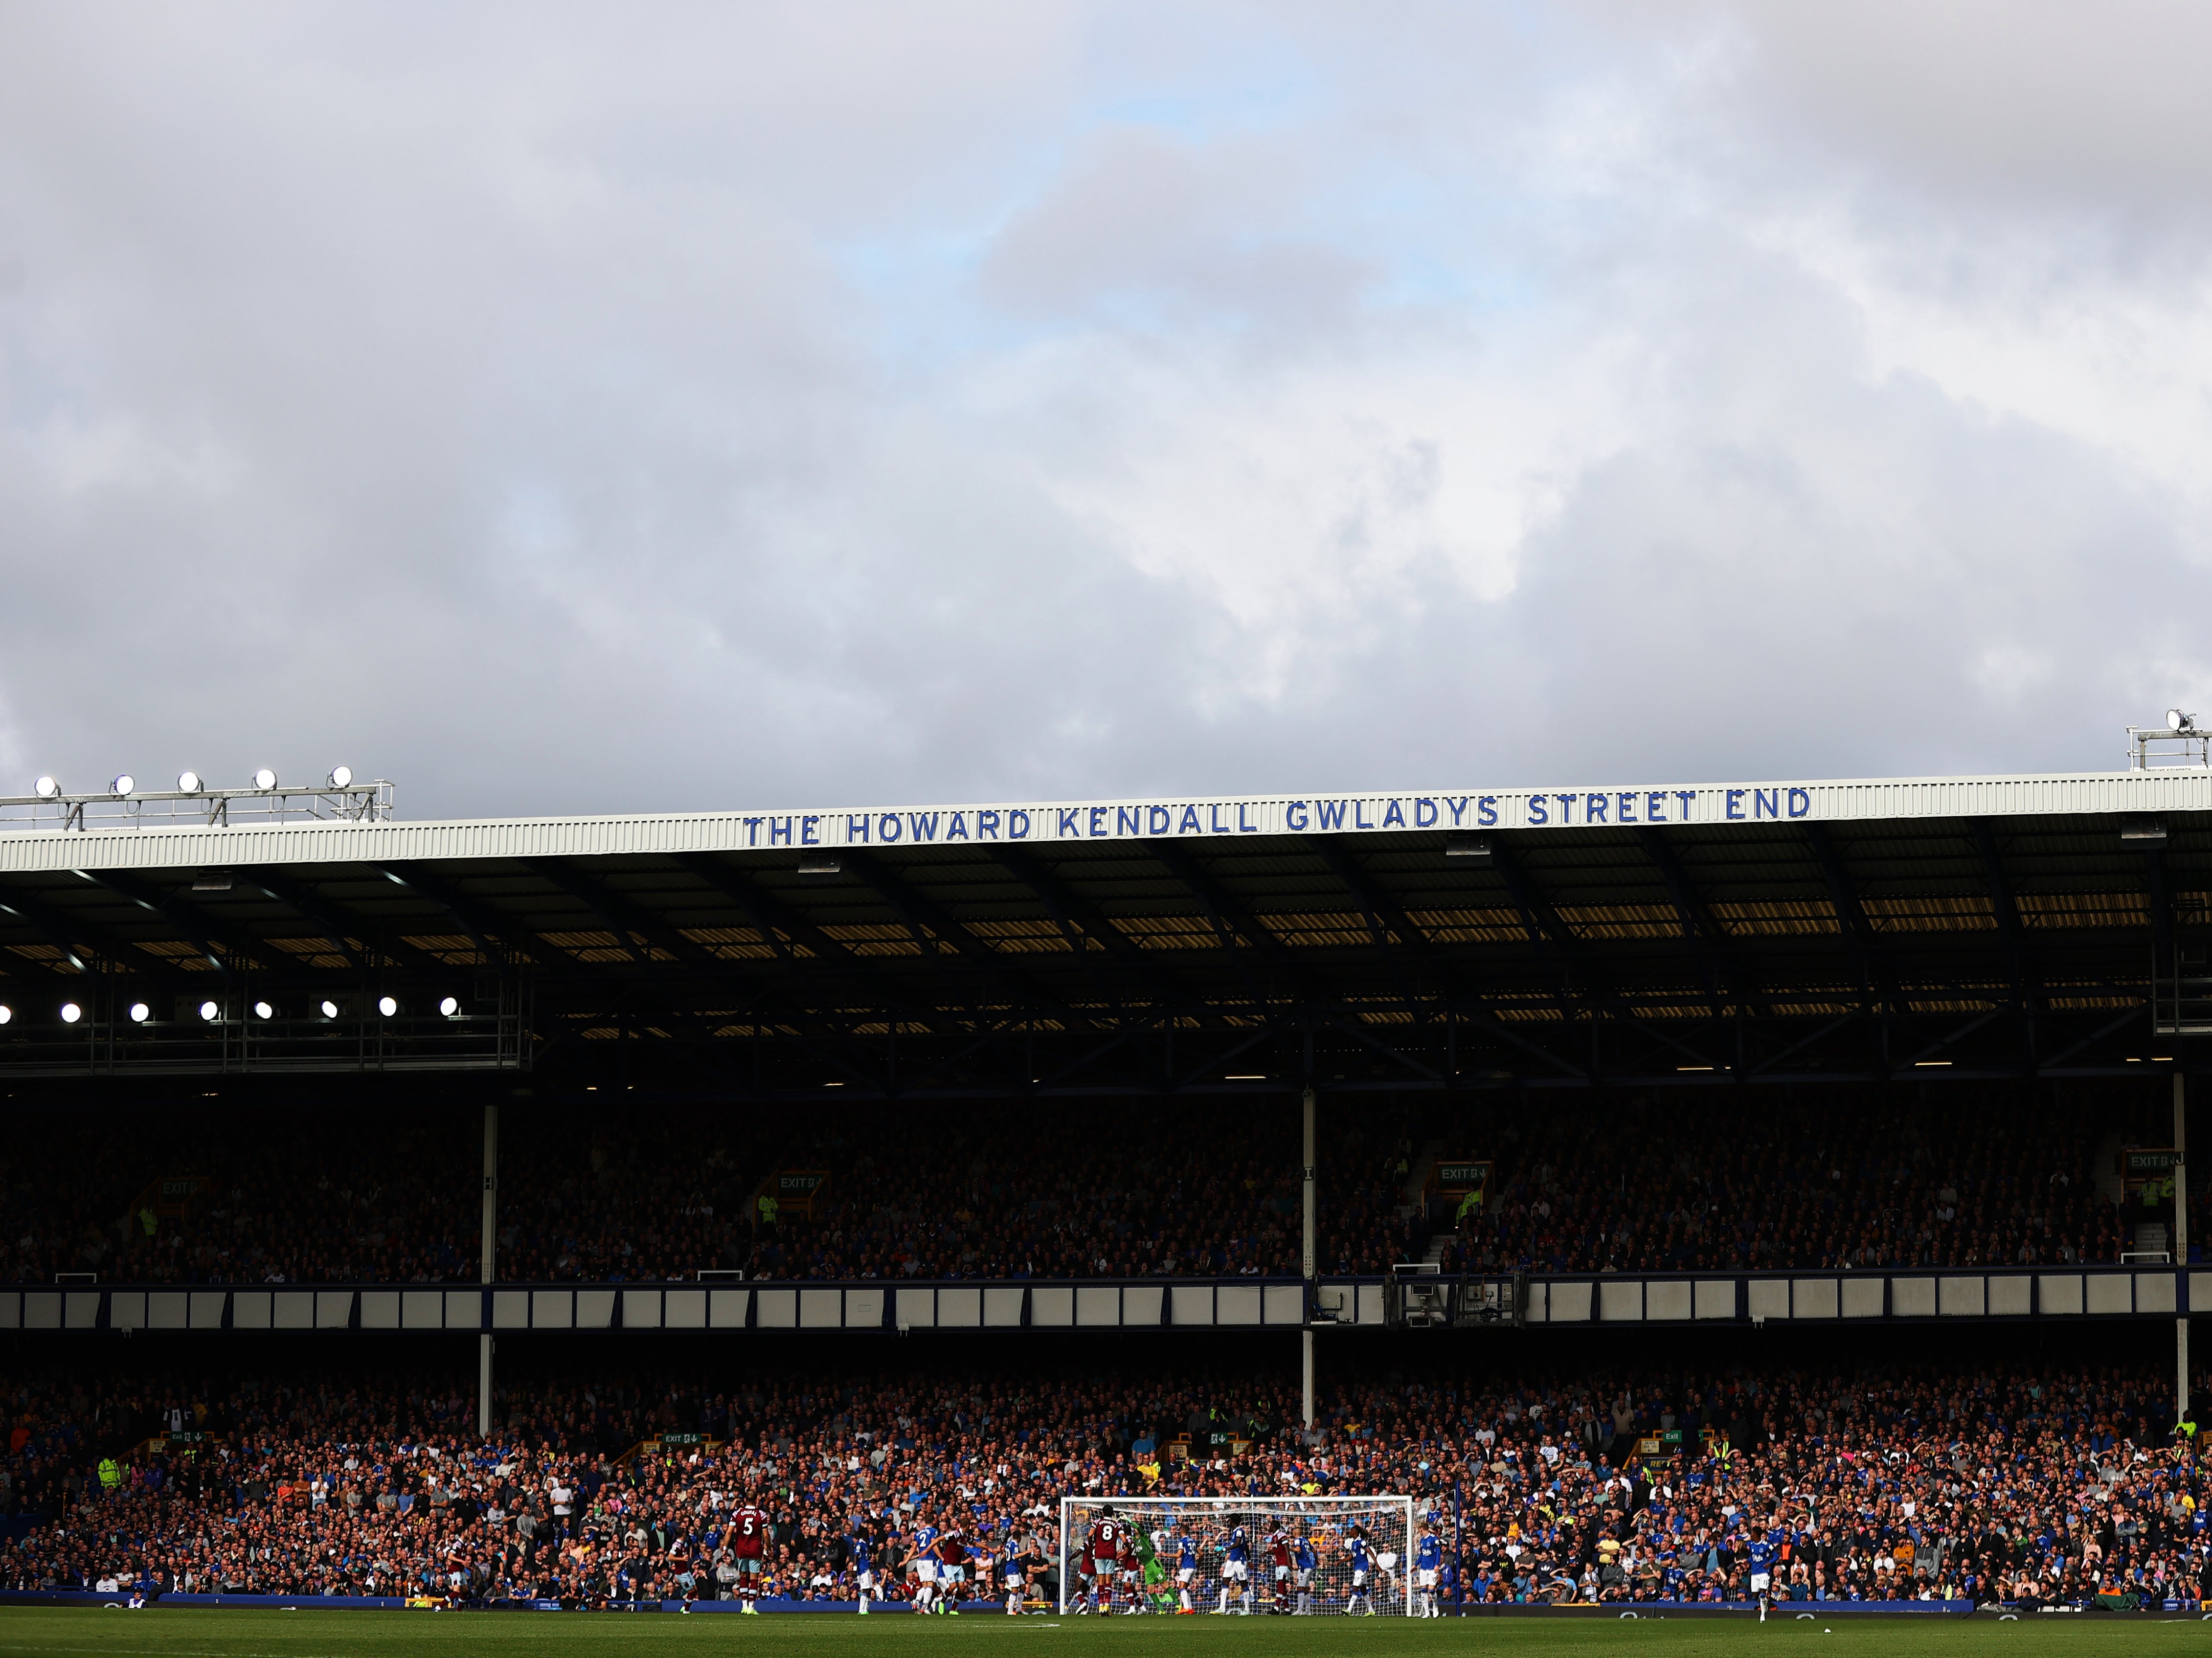 Goodison Park, the home of Everton